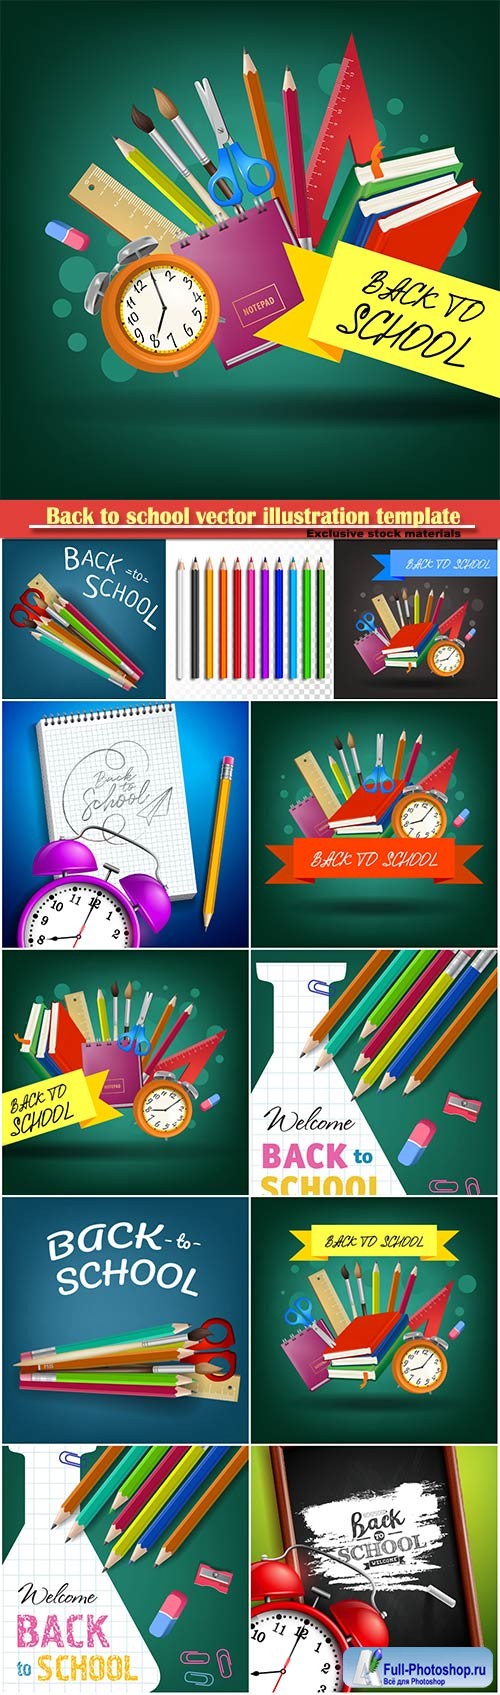 Back to school vector illustration template # 11